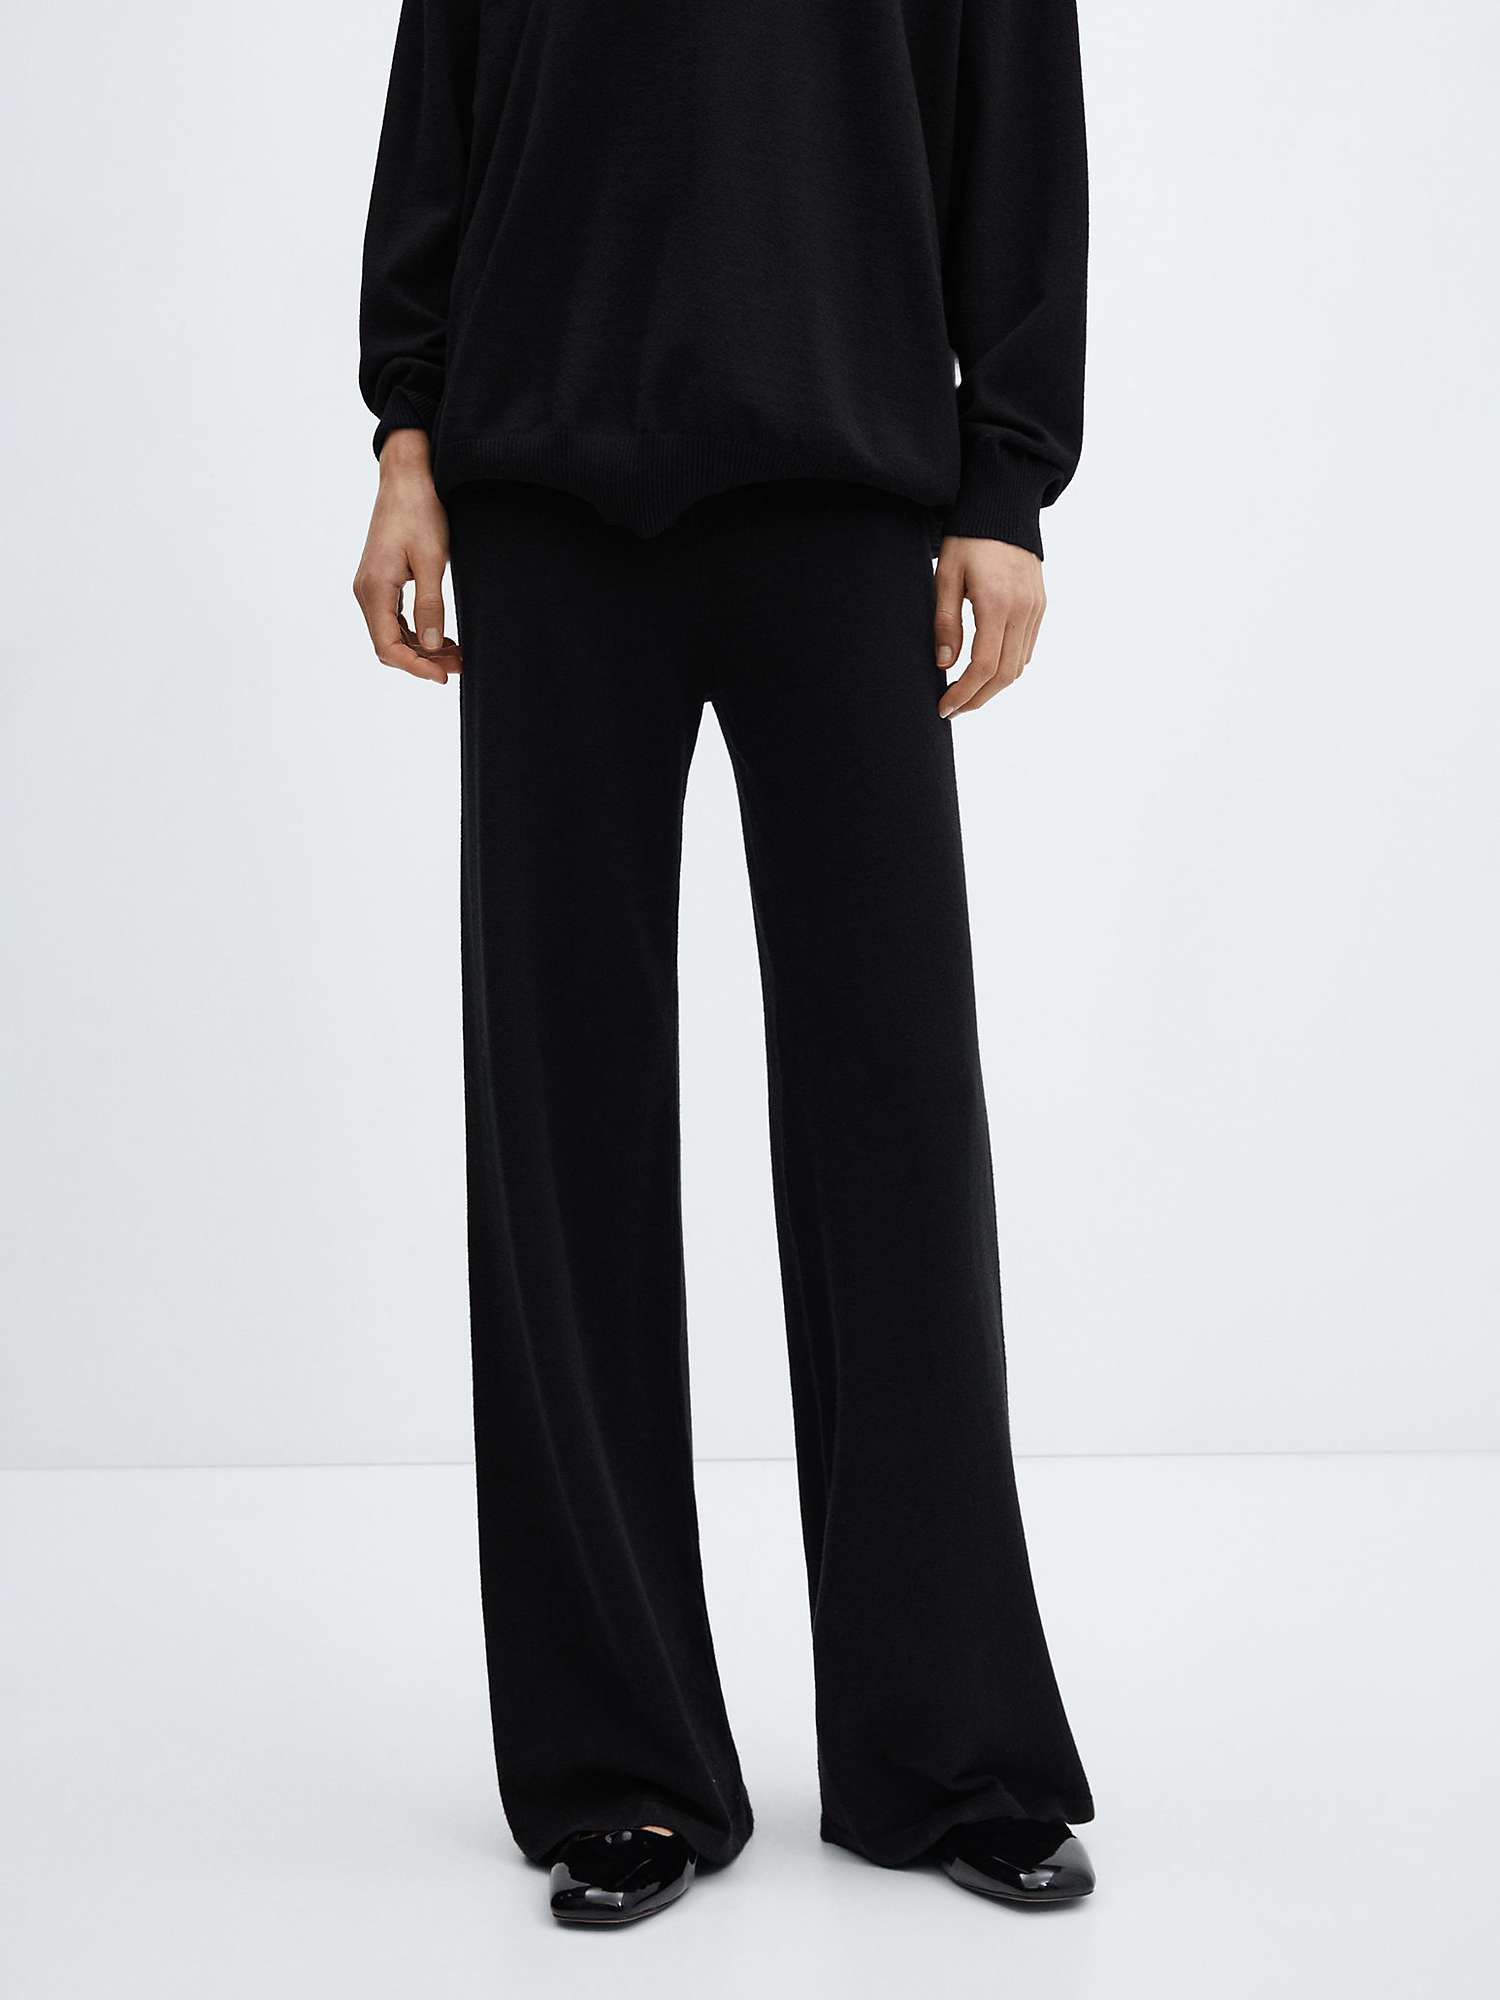 Buy Mango Vieira Knitted Wide Leg Trousers Online at johnlewis.com